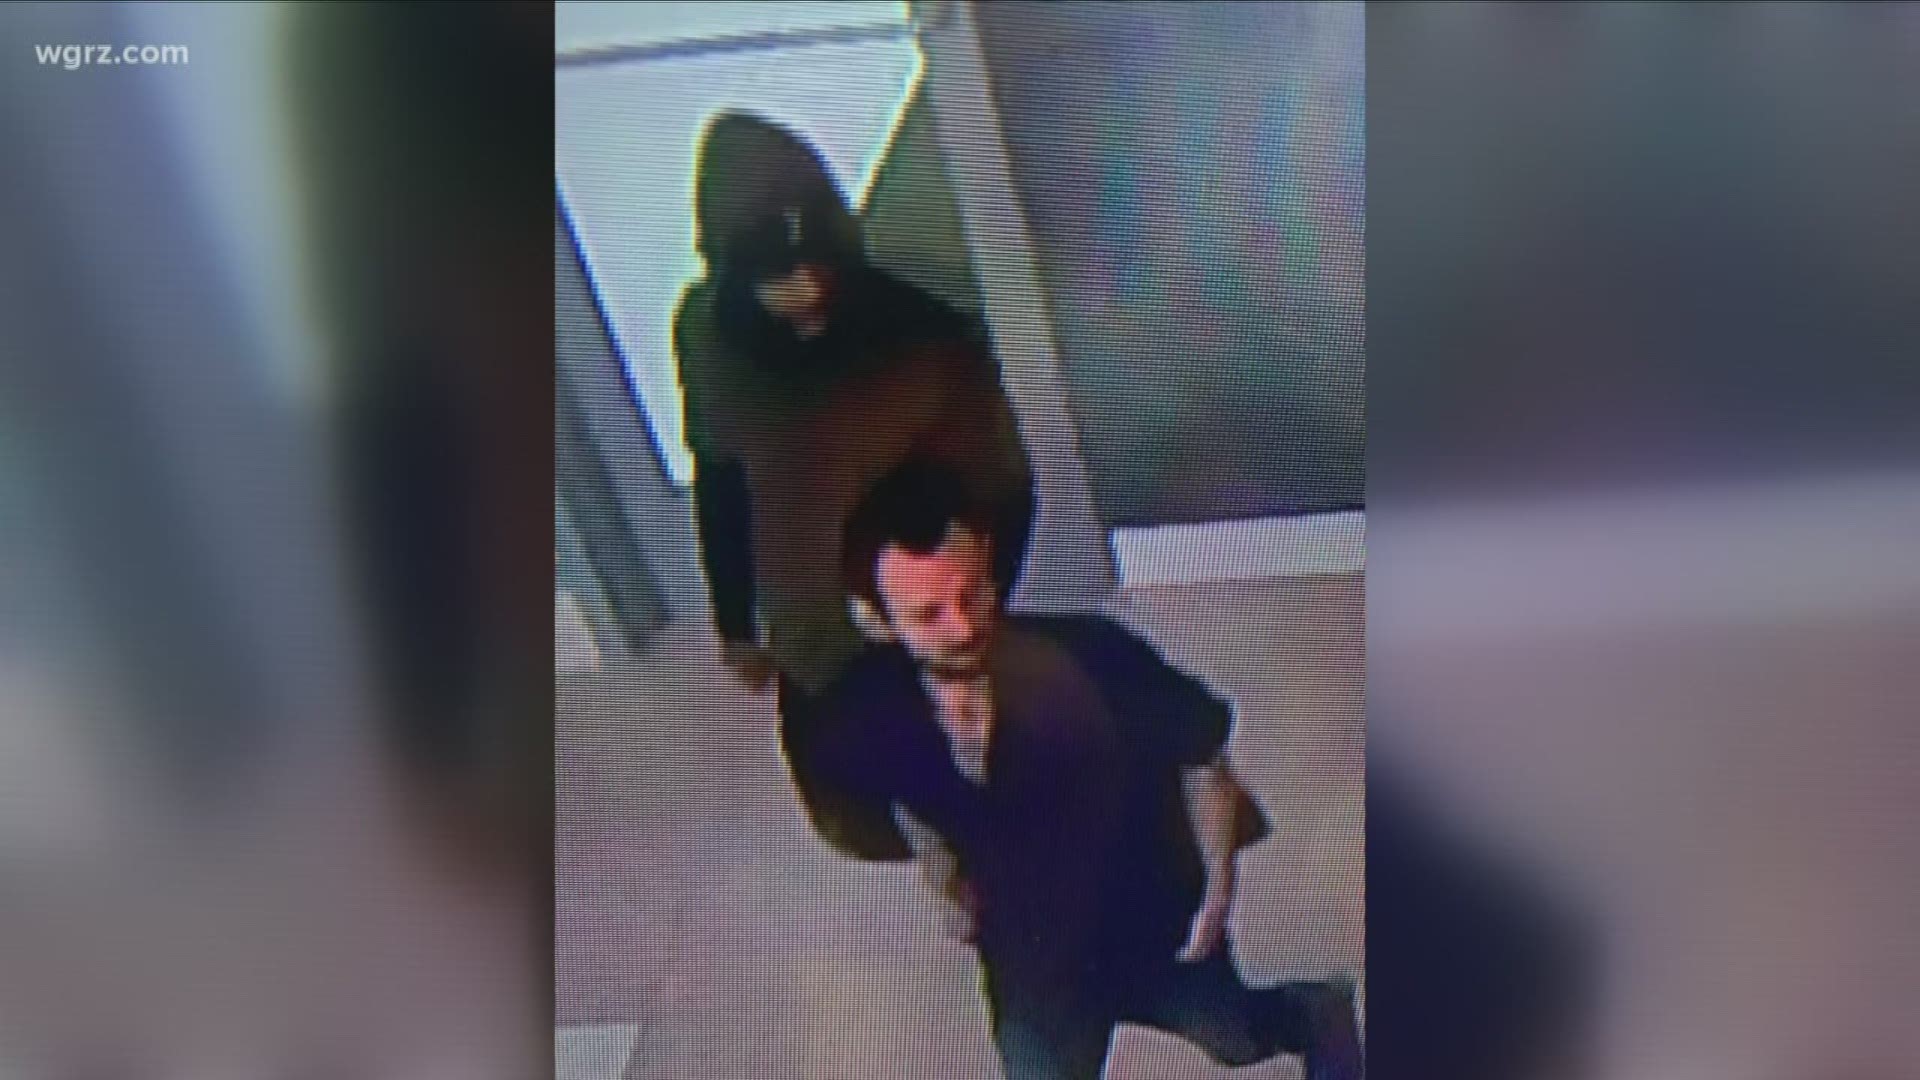 Police in the Town of Niagara want to know if you recognize these two men who they say stole from the fashion outlets.